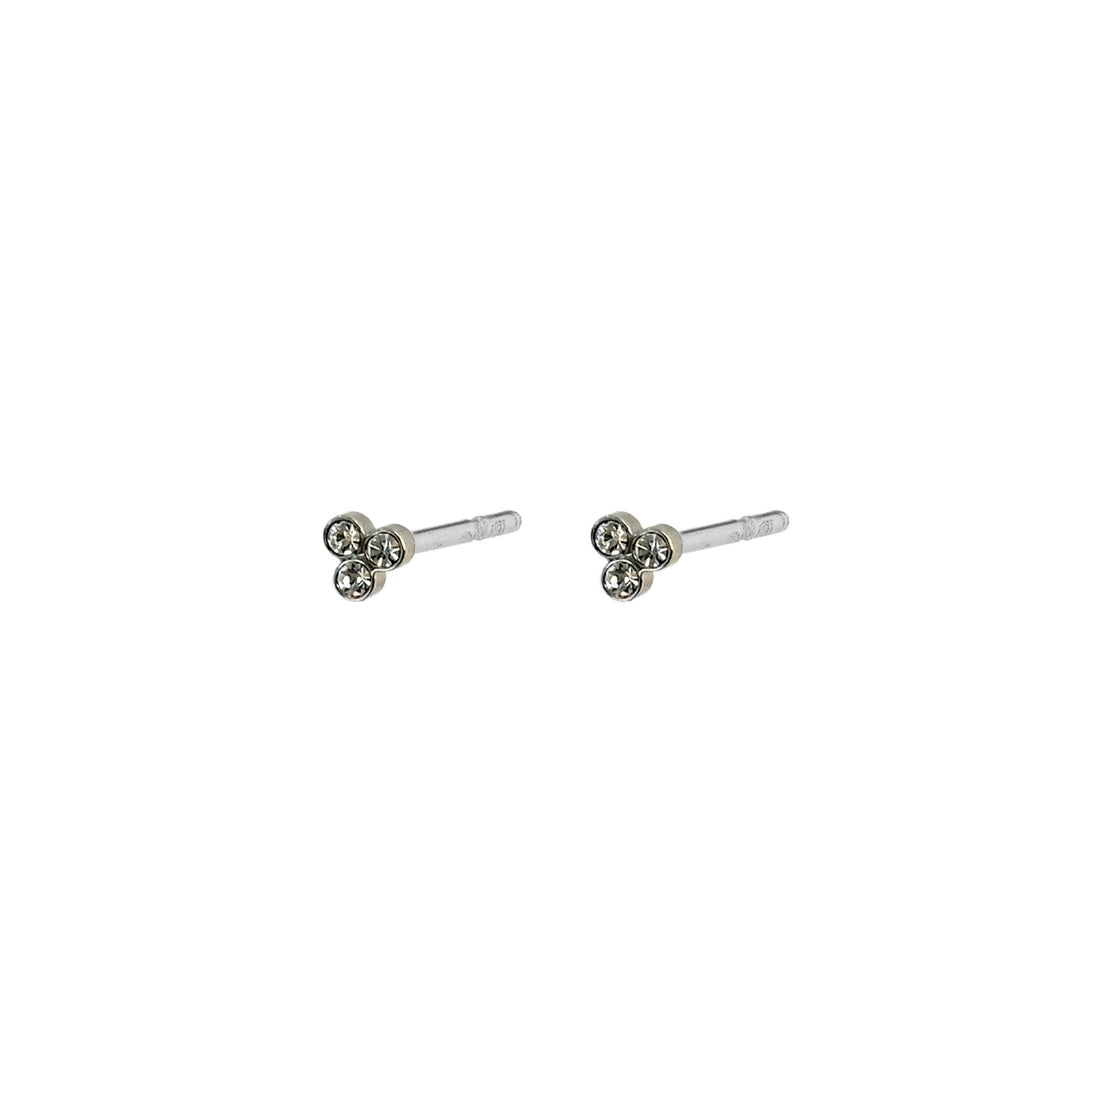 PIERCING STUDIO: Caily Stud Silver (Surgical Steel)